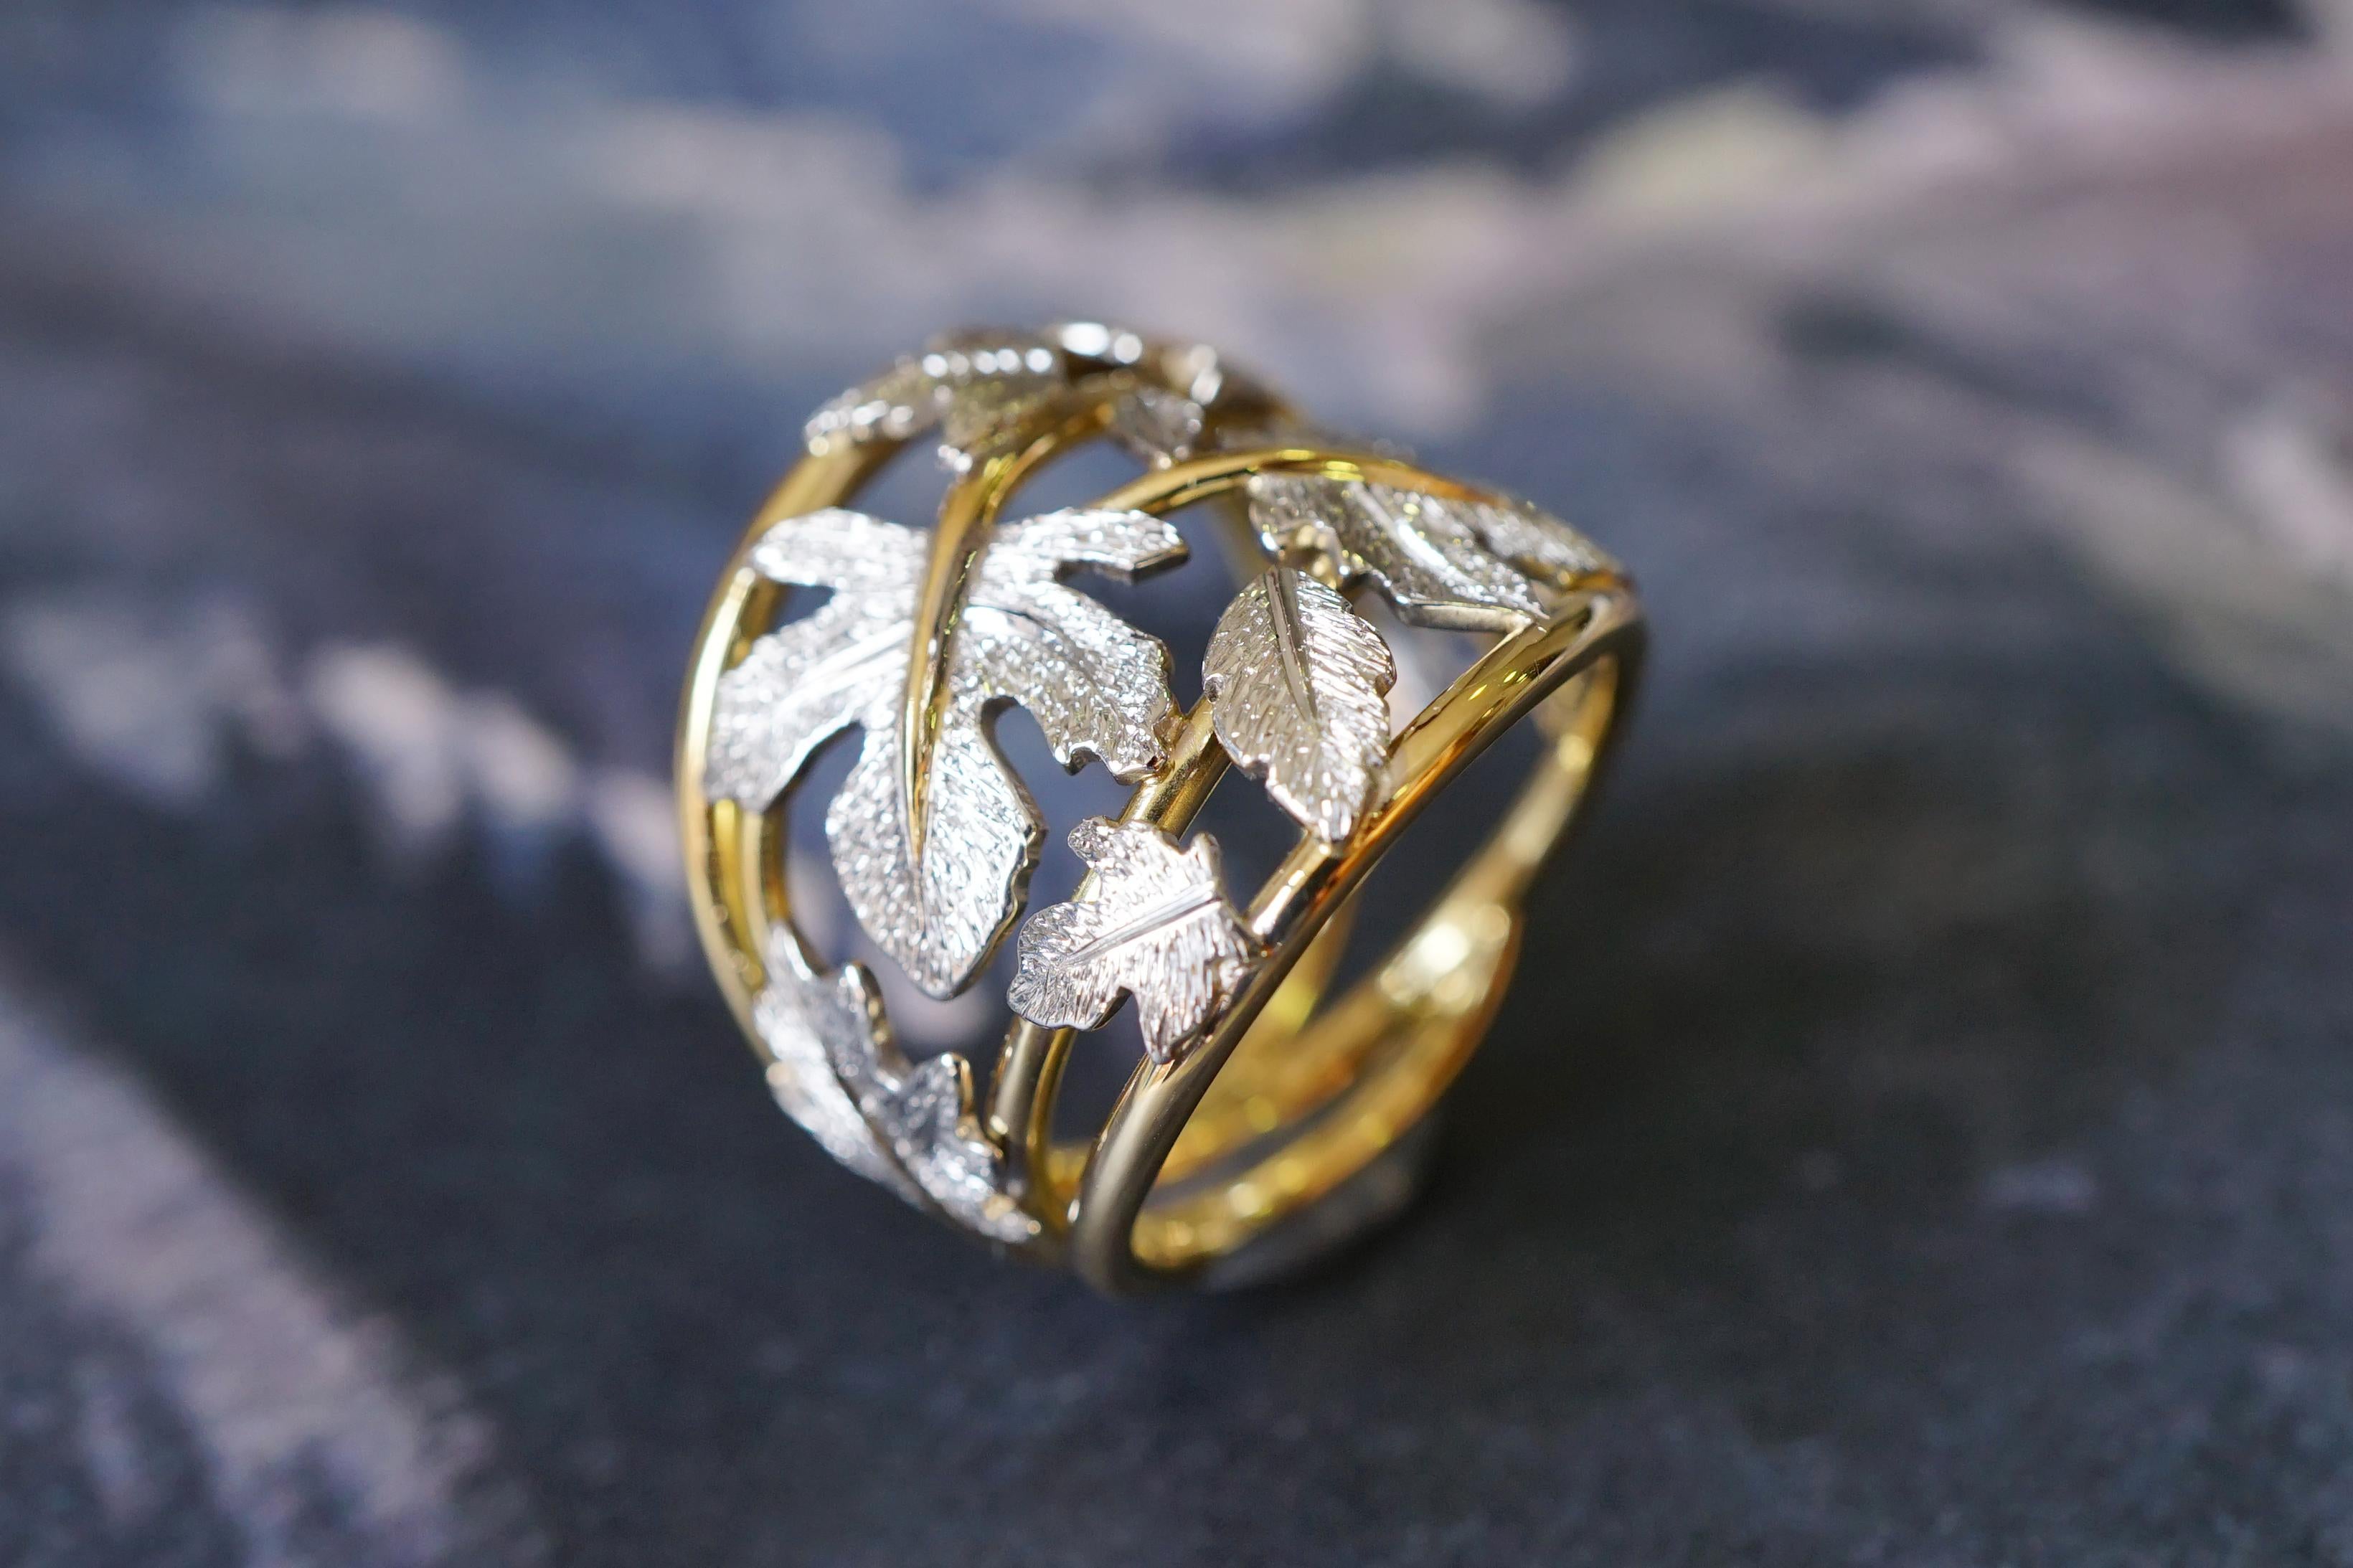 Coralie Van Caloen 18 Carat Bi-color Yellow And White Gold Band Ring With Hand Engraved Fig Leaves is entirely hand made and forged in Belgium by experts goldsmiths therefore it is a very unique piece. Inspired by Mediterranean summer atmospheres